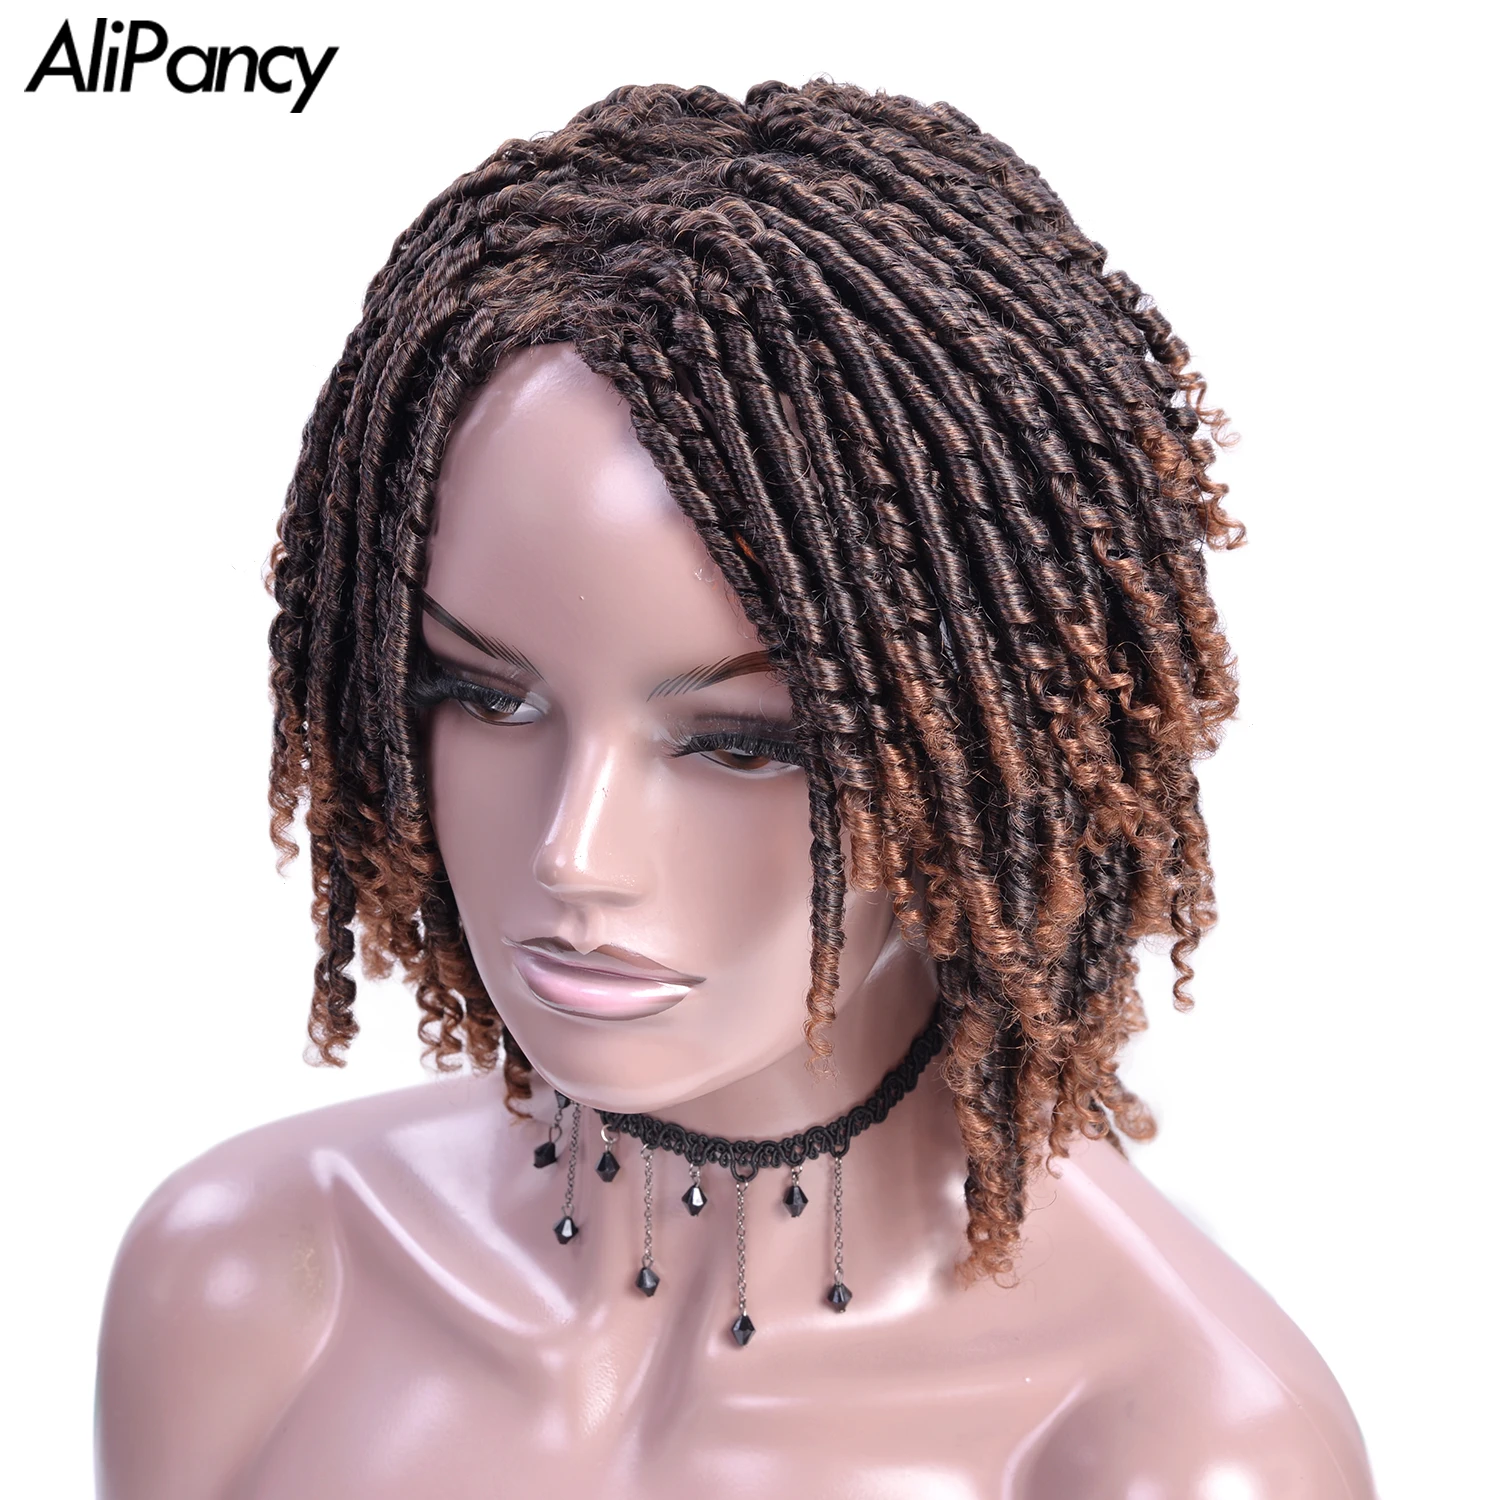 

8inch Short Soft Dreadlock Synthetic Wigs For Black Women Afro Kinky Curly Hair With Bangs Ombre Brown Crochet Wigs Blonde Bug